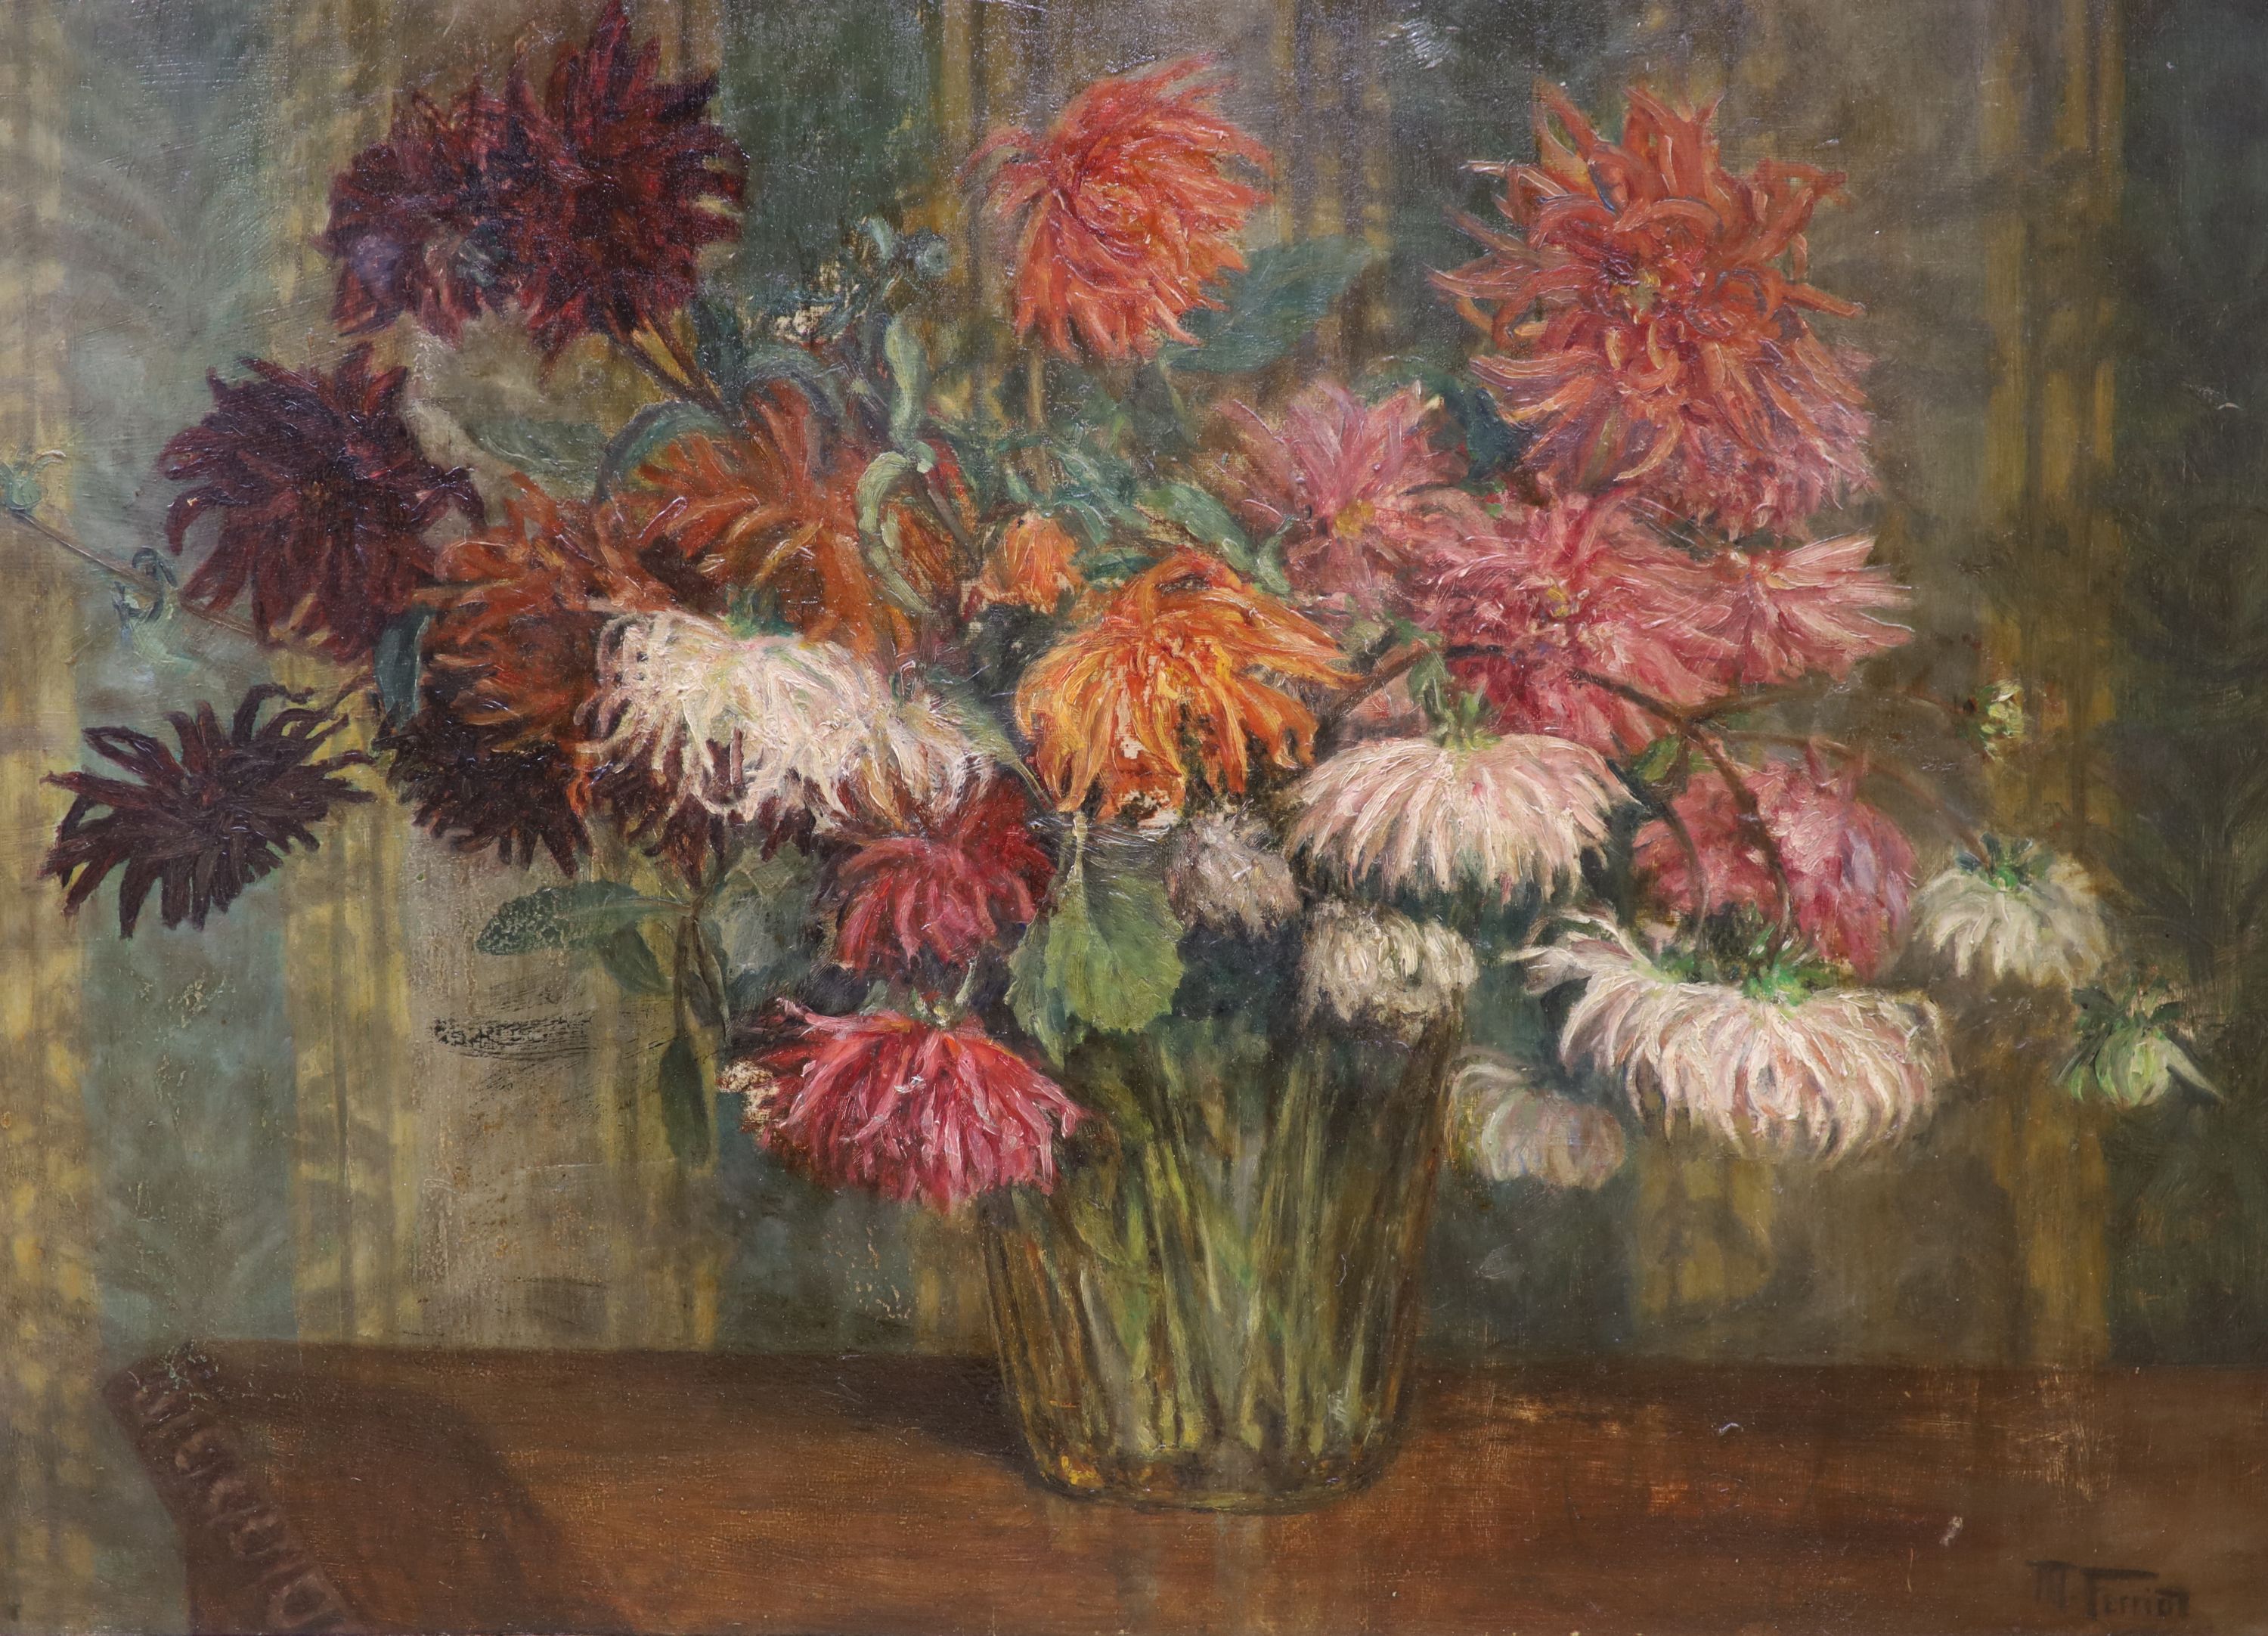 Early 20th century continental school, a still life study of dahlias, oil on board, signed lower right, 52 x 75 cm.